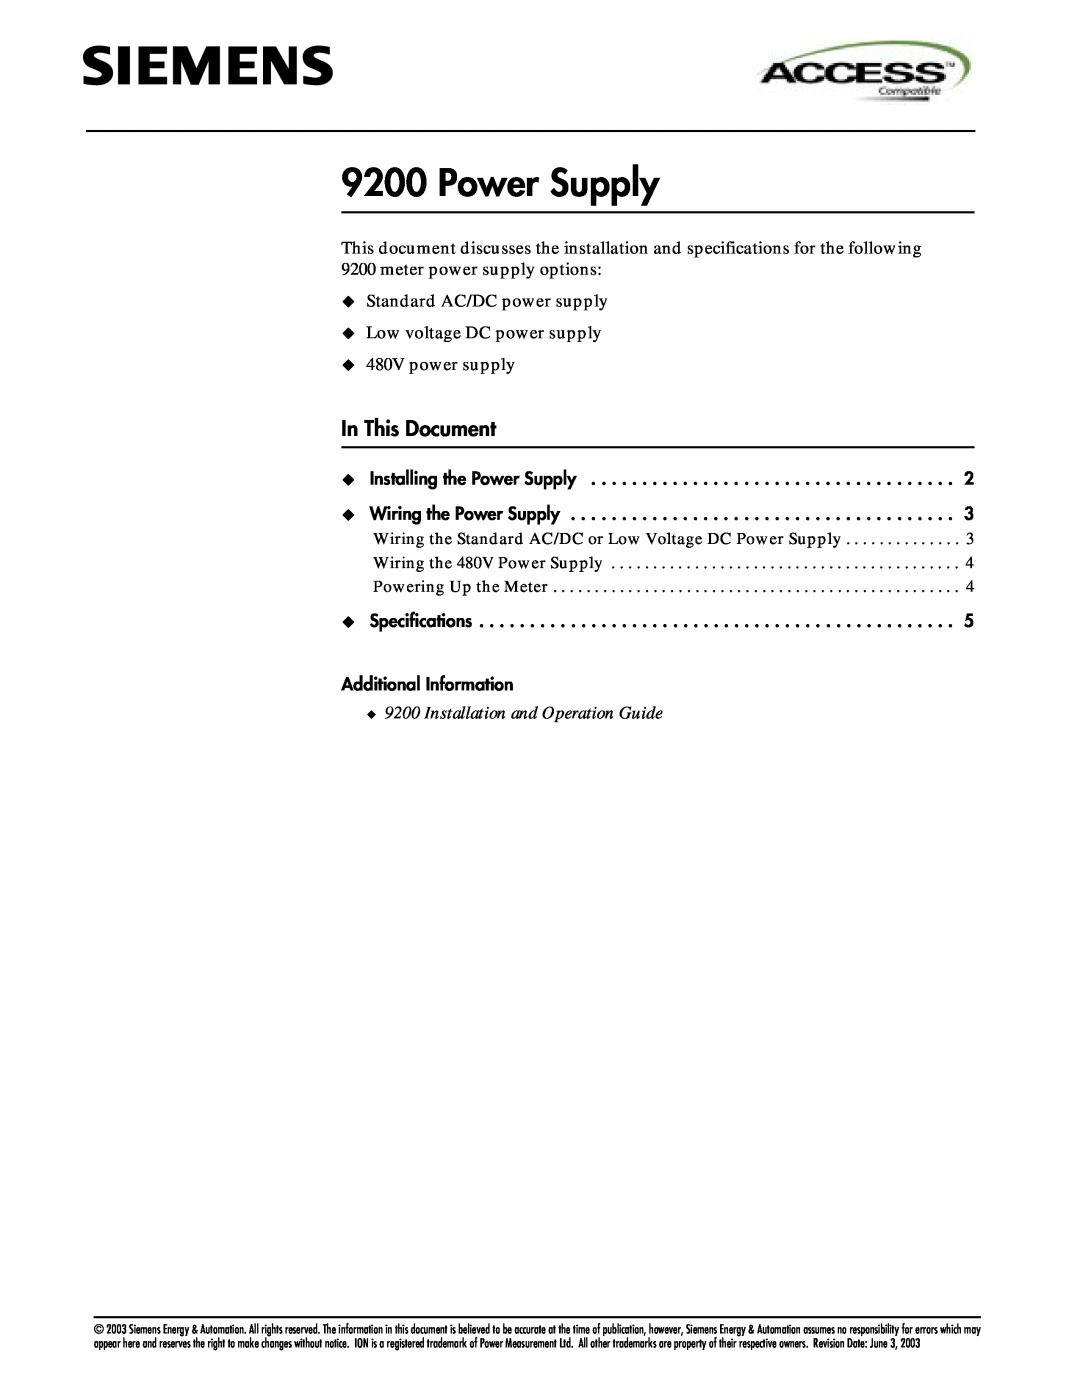 Siemens 9200 specifications Power Supply, In This Document, Installation and Operation Guide 